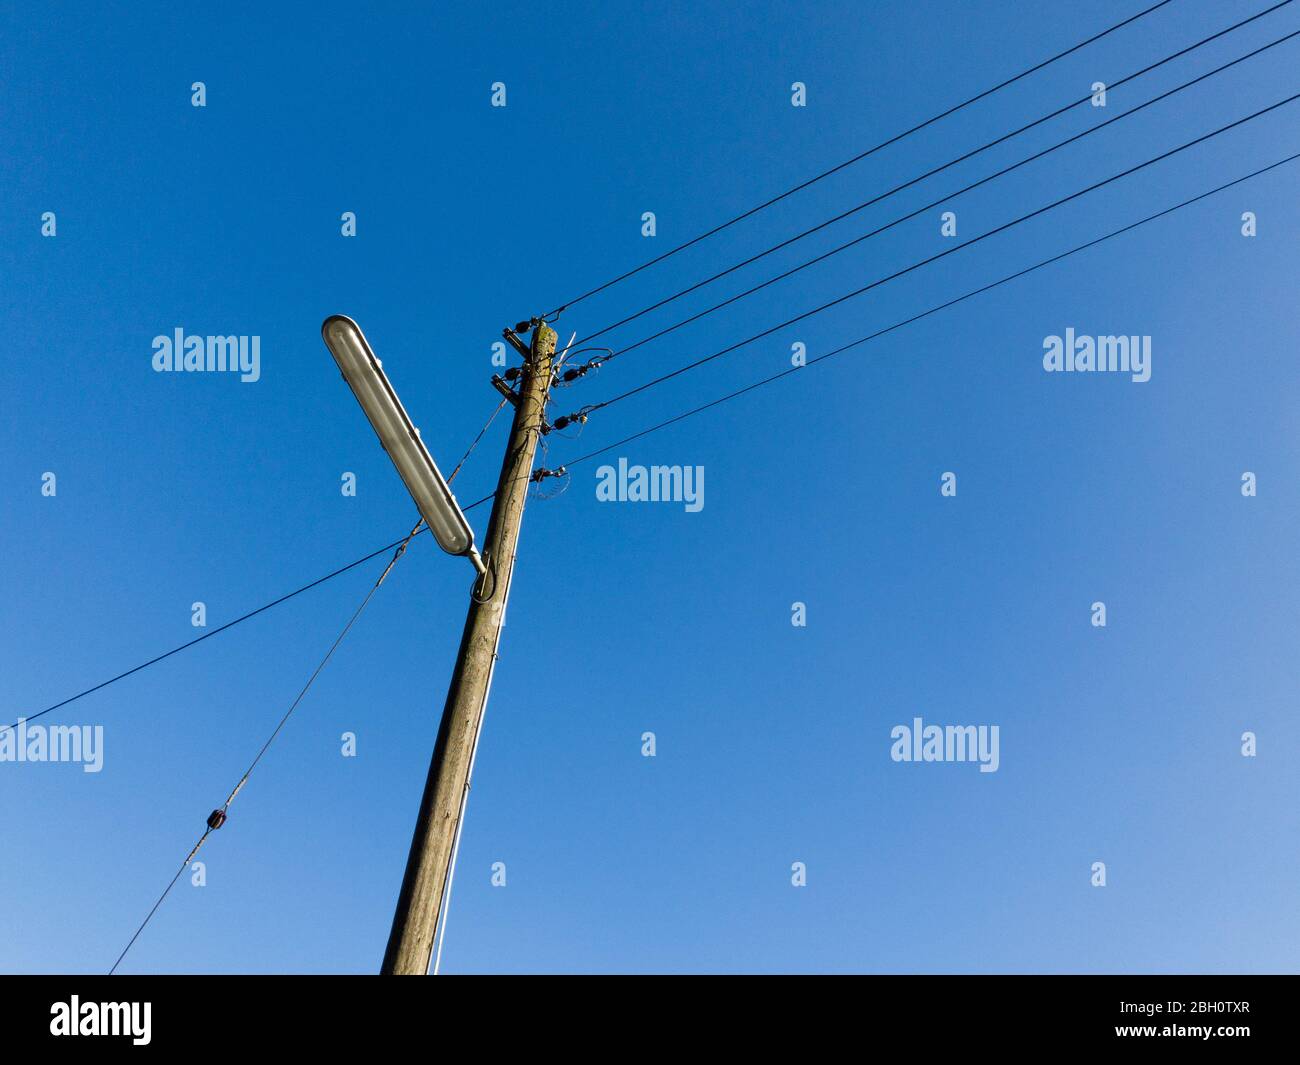 Street lamp and wooden telephone pole with cables and wires against clear blue sky in the countryside in Rhineland-Palatinate, Germany, Western Europe Stock Photo